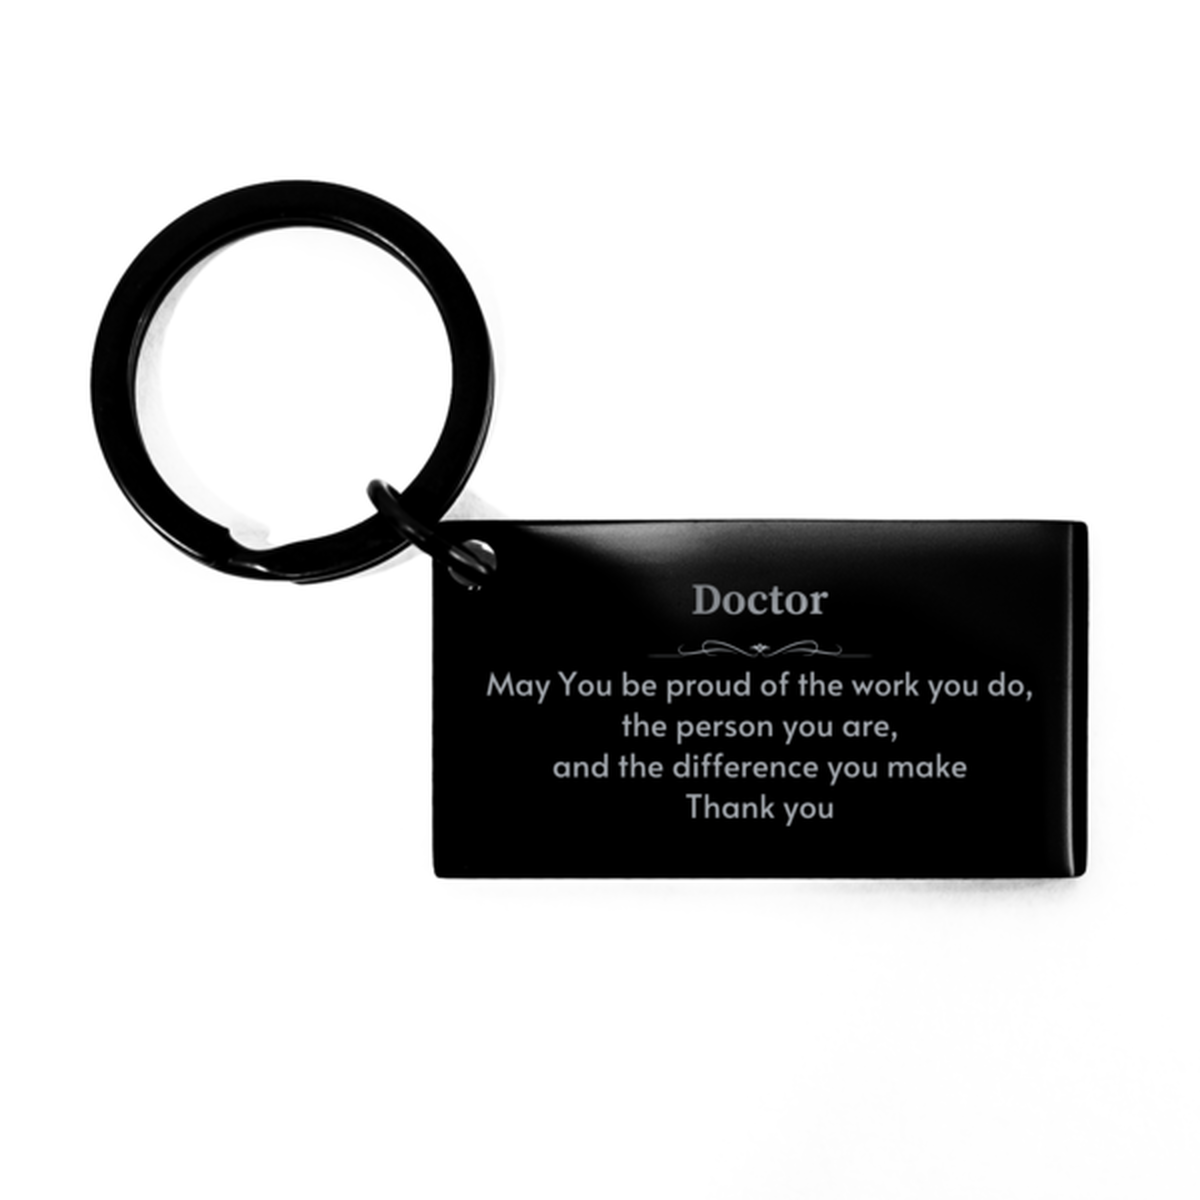 Heartwarming Keychain Retirement Coworkers Gifts for Doctor, Health and Safety Engineer May You be proud of the work you do, the person you are Gifts for Boss Men Women Friends